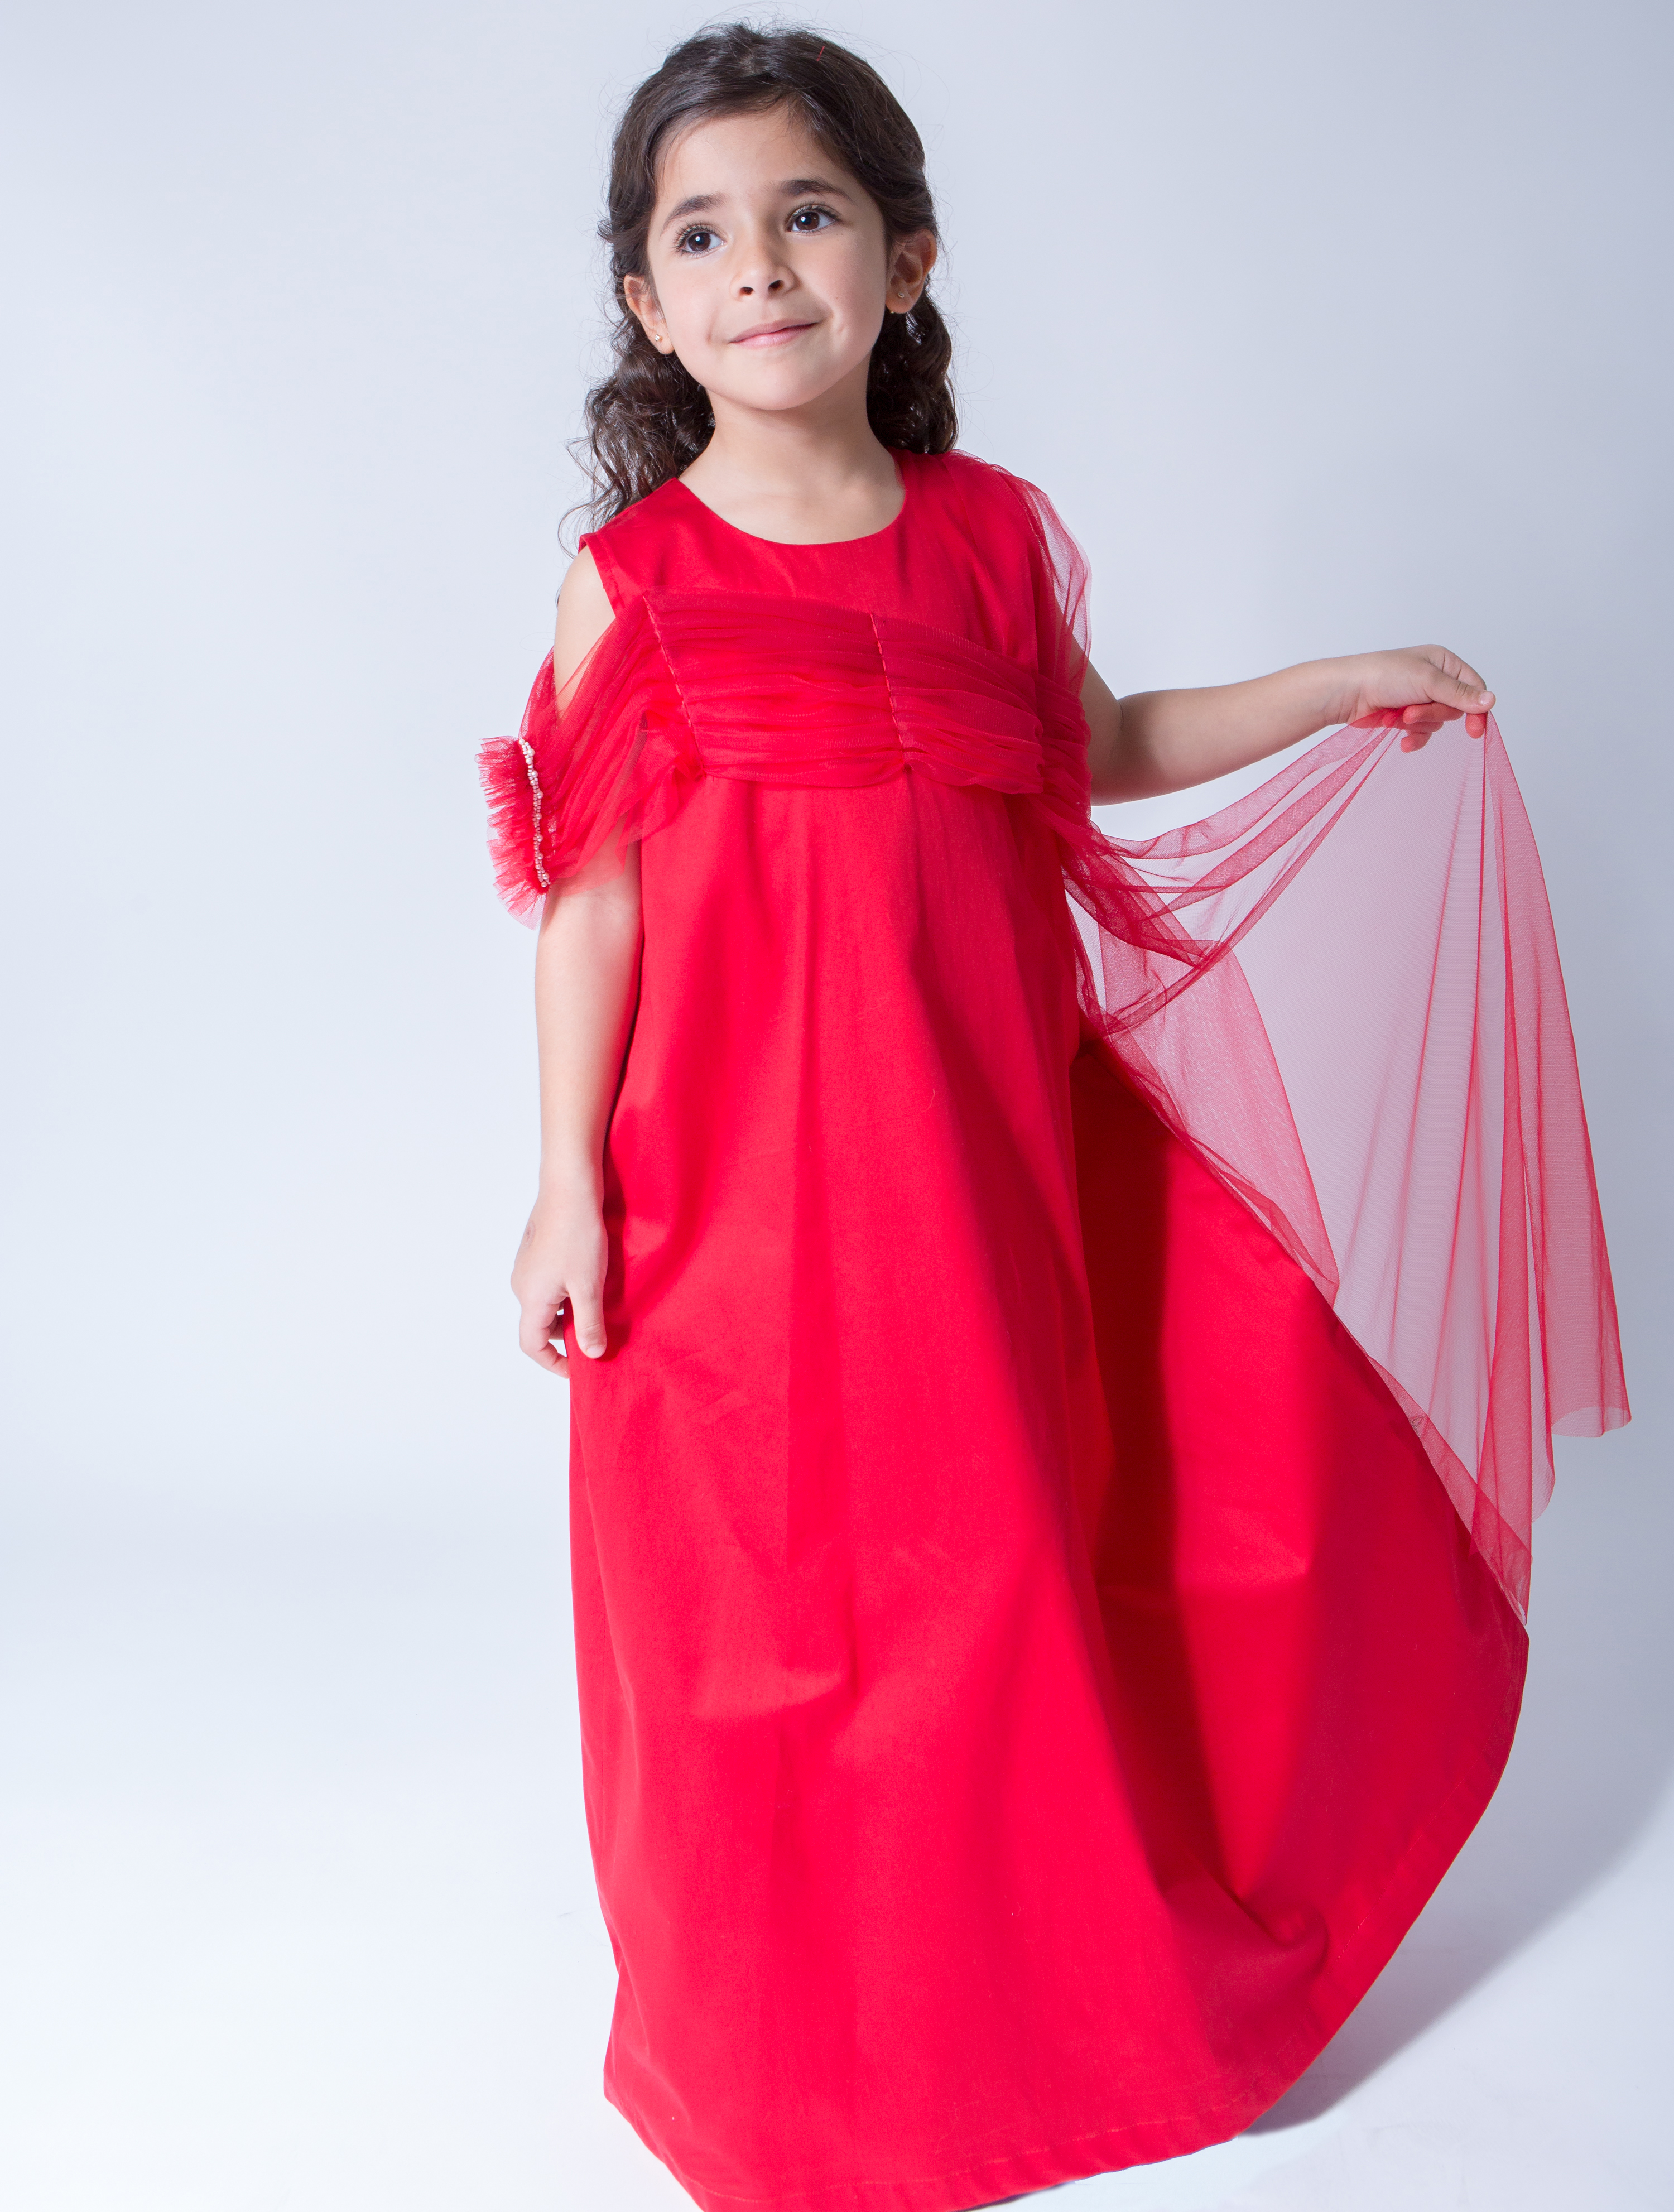                                                                                     Myazaa - Red Dress with tulle